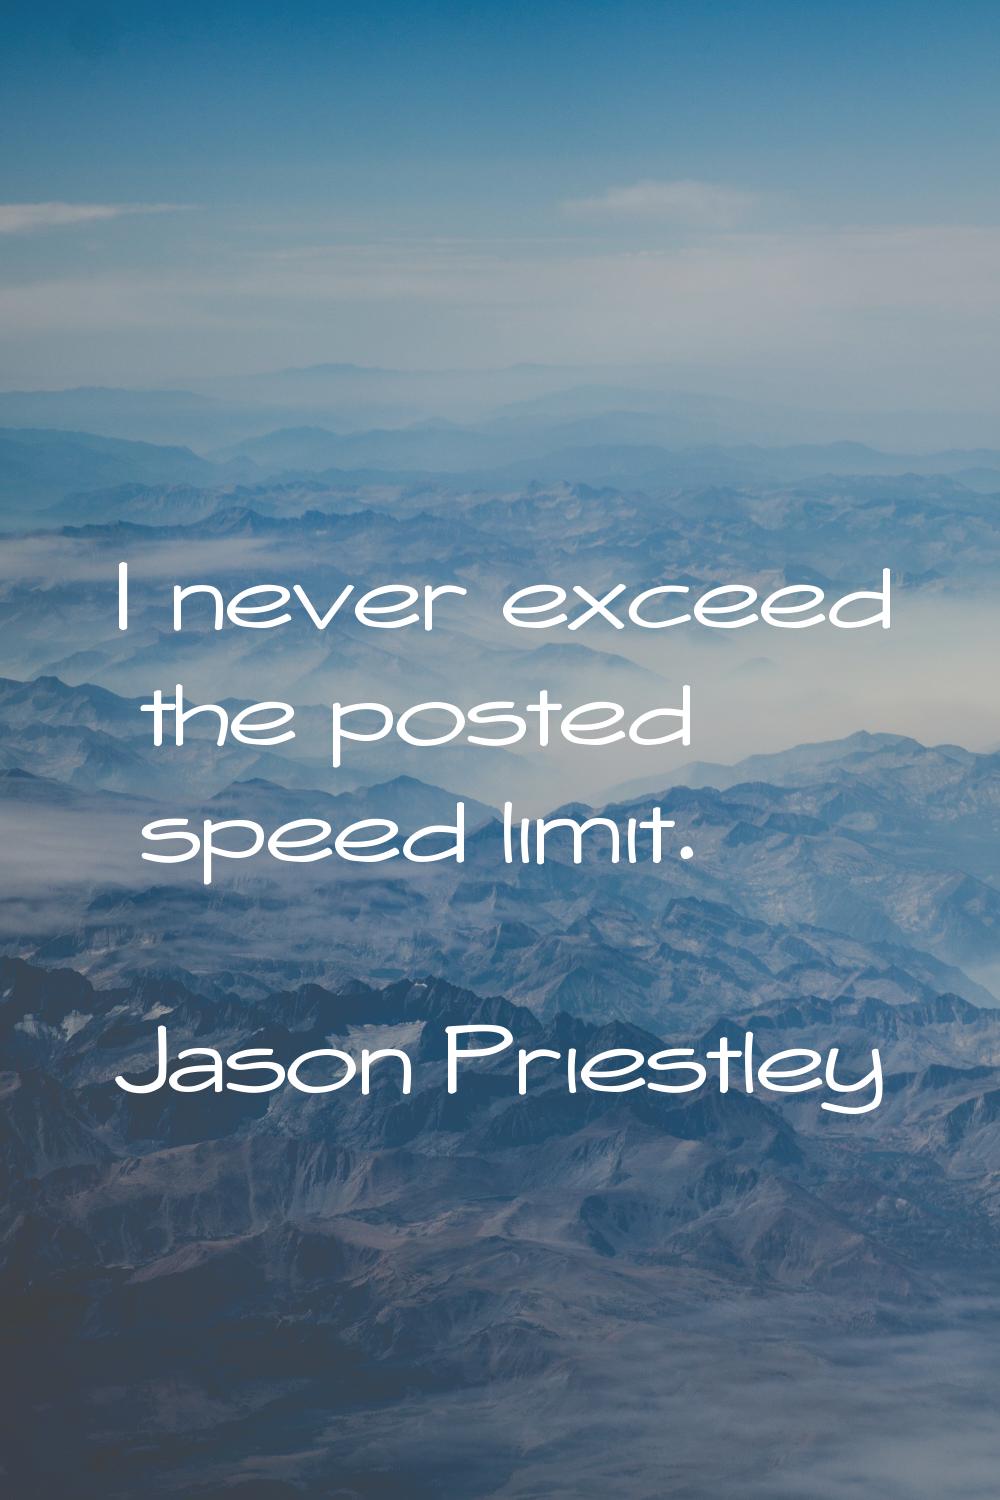 I never exceed the posted speed limit.